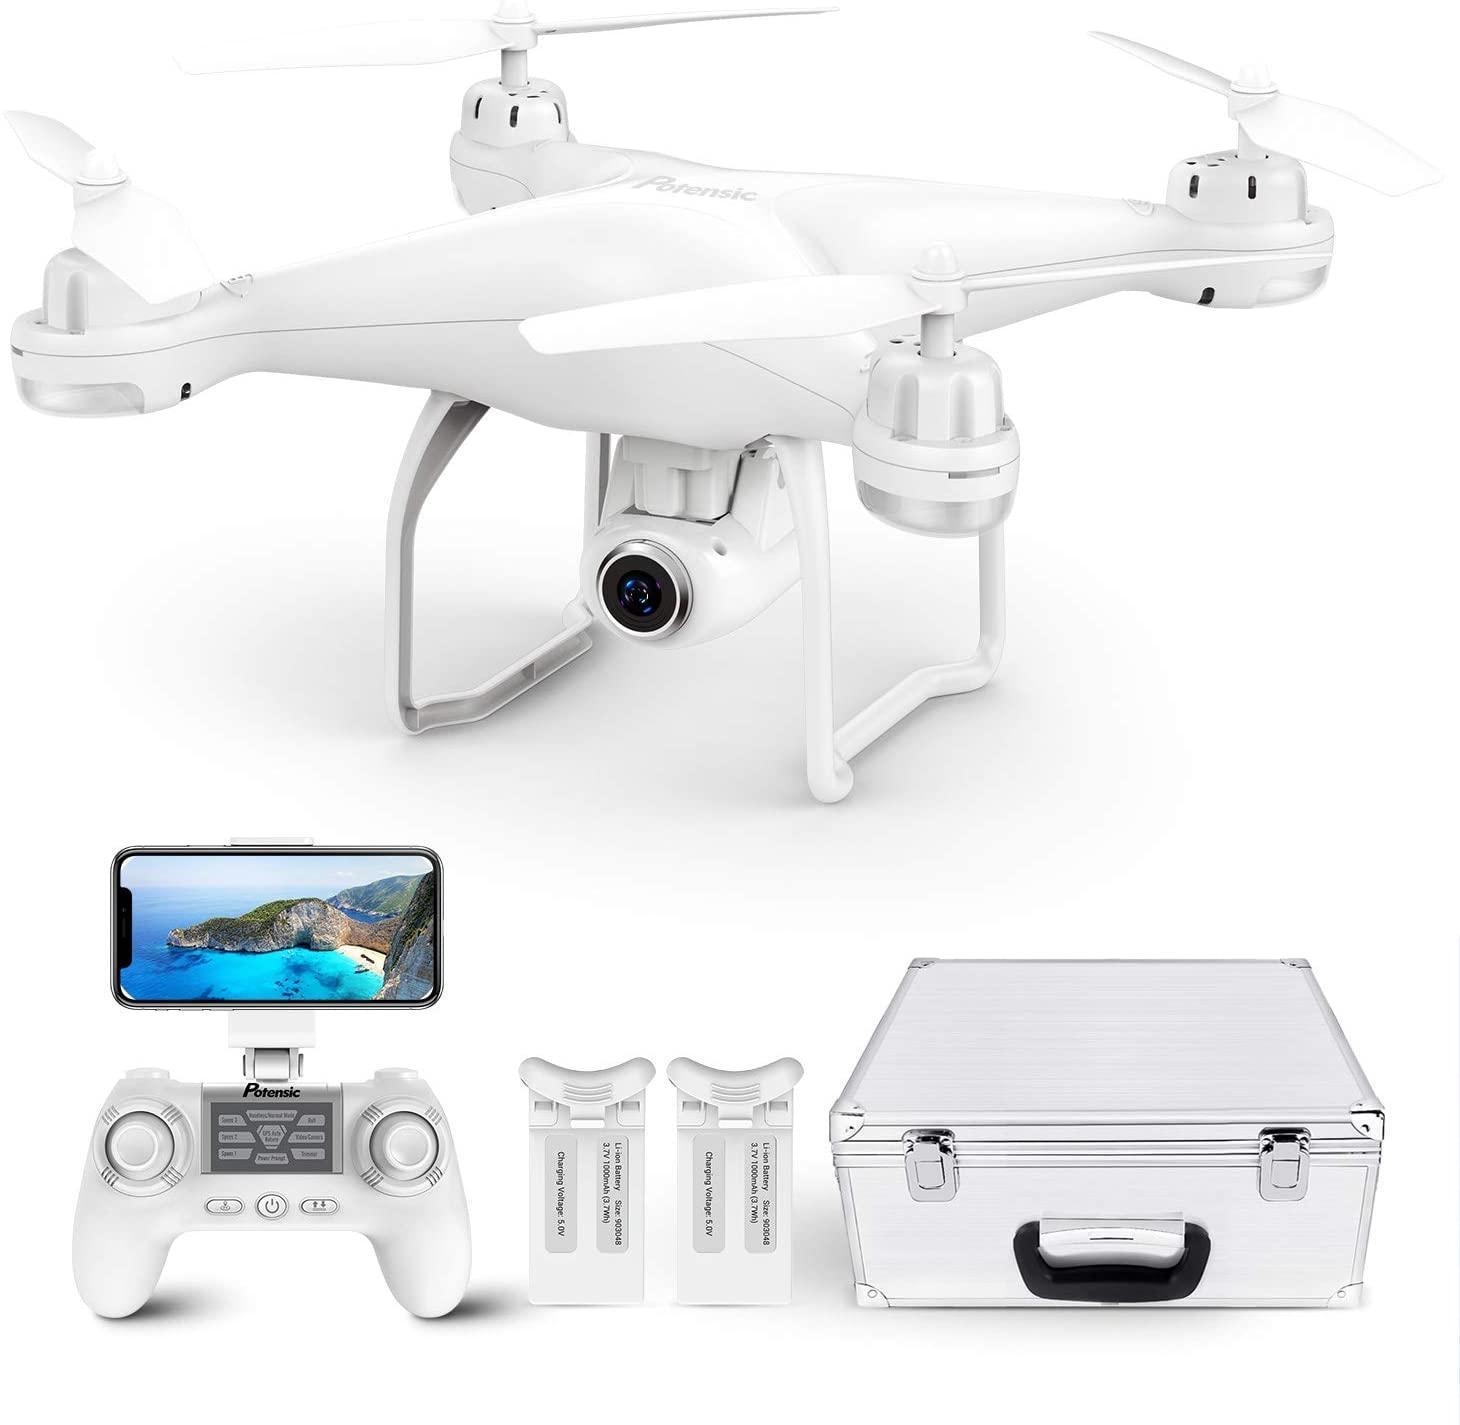 Potensic T25 GPS Drone, FPV RC Drone with Camera 1080P HD WiFi Live Video $179.99 MSRP